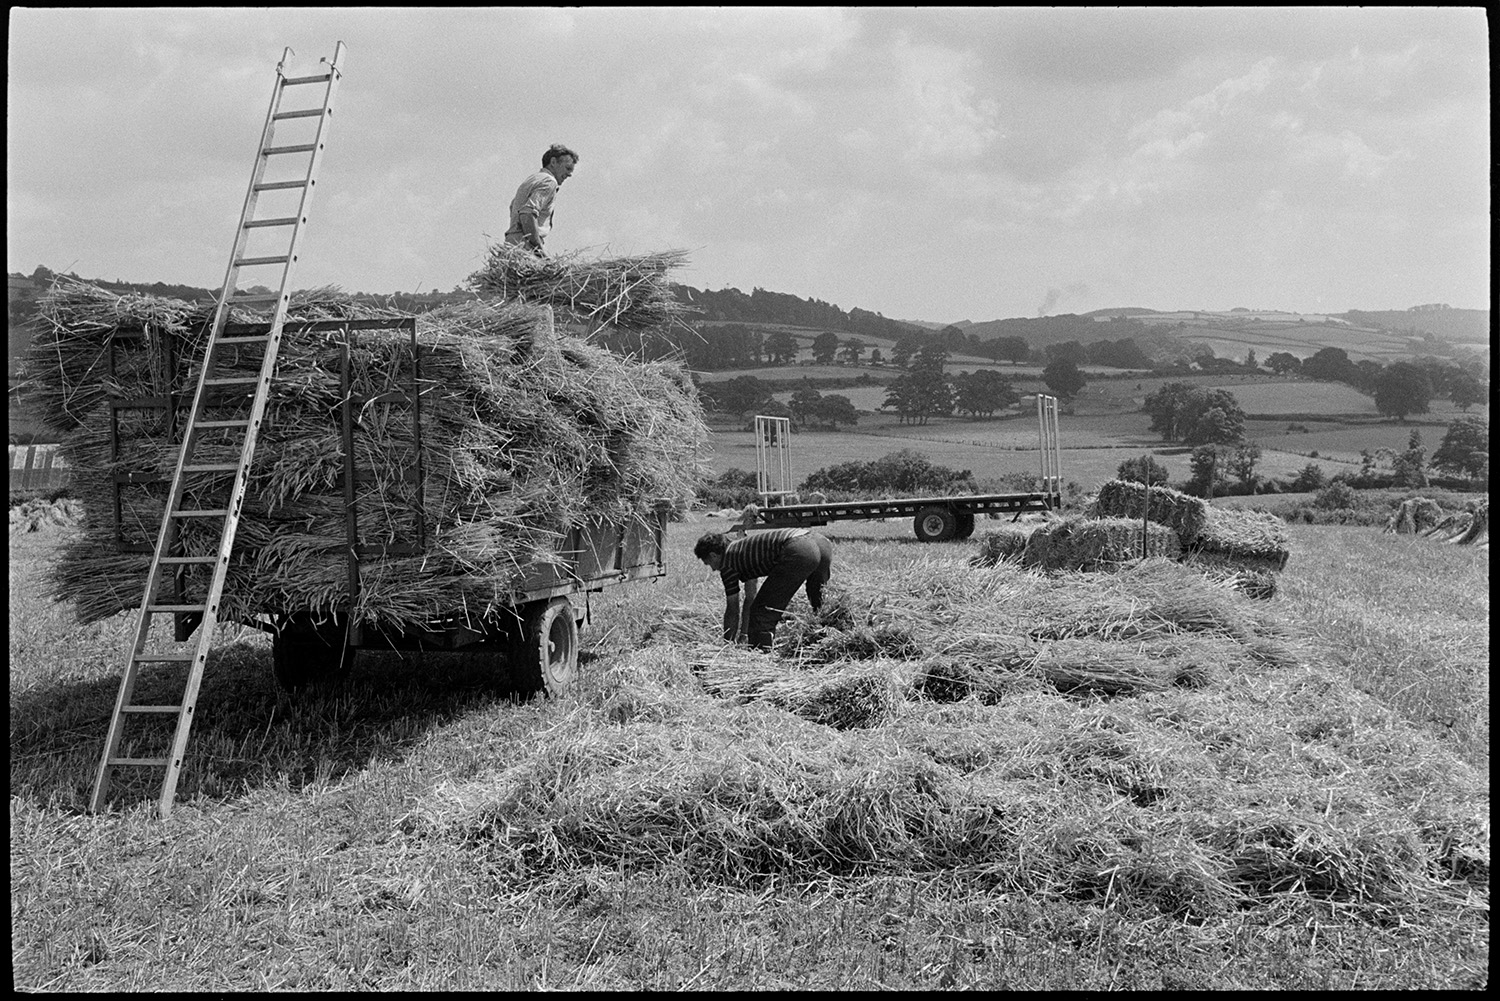 Men building wheatrick in harvest field.
[Men, possibly from the Cole family, unloading  corn or wheat from a trailer and building a wheatrick in a field at Ashreigney. A ladder is resting against the trailer. Views of hills, fields and trees are visible in the distance.]